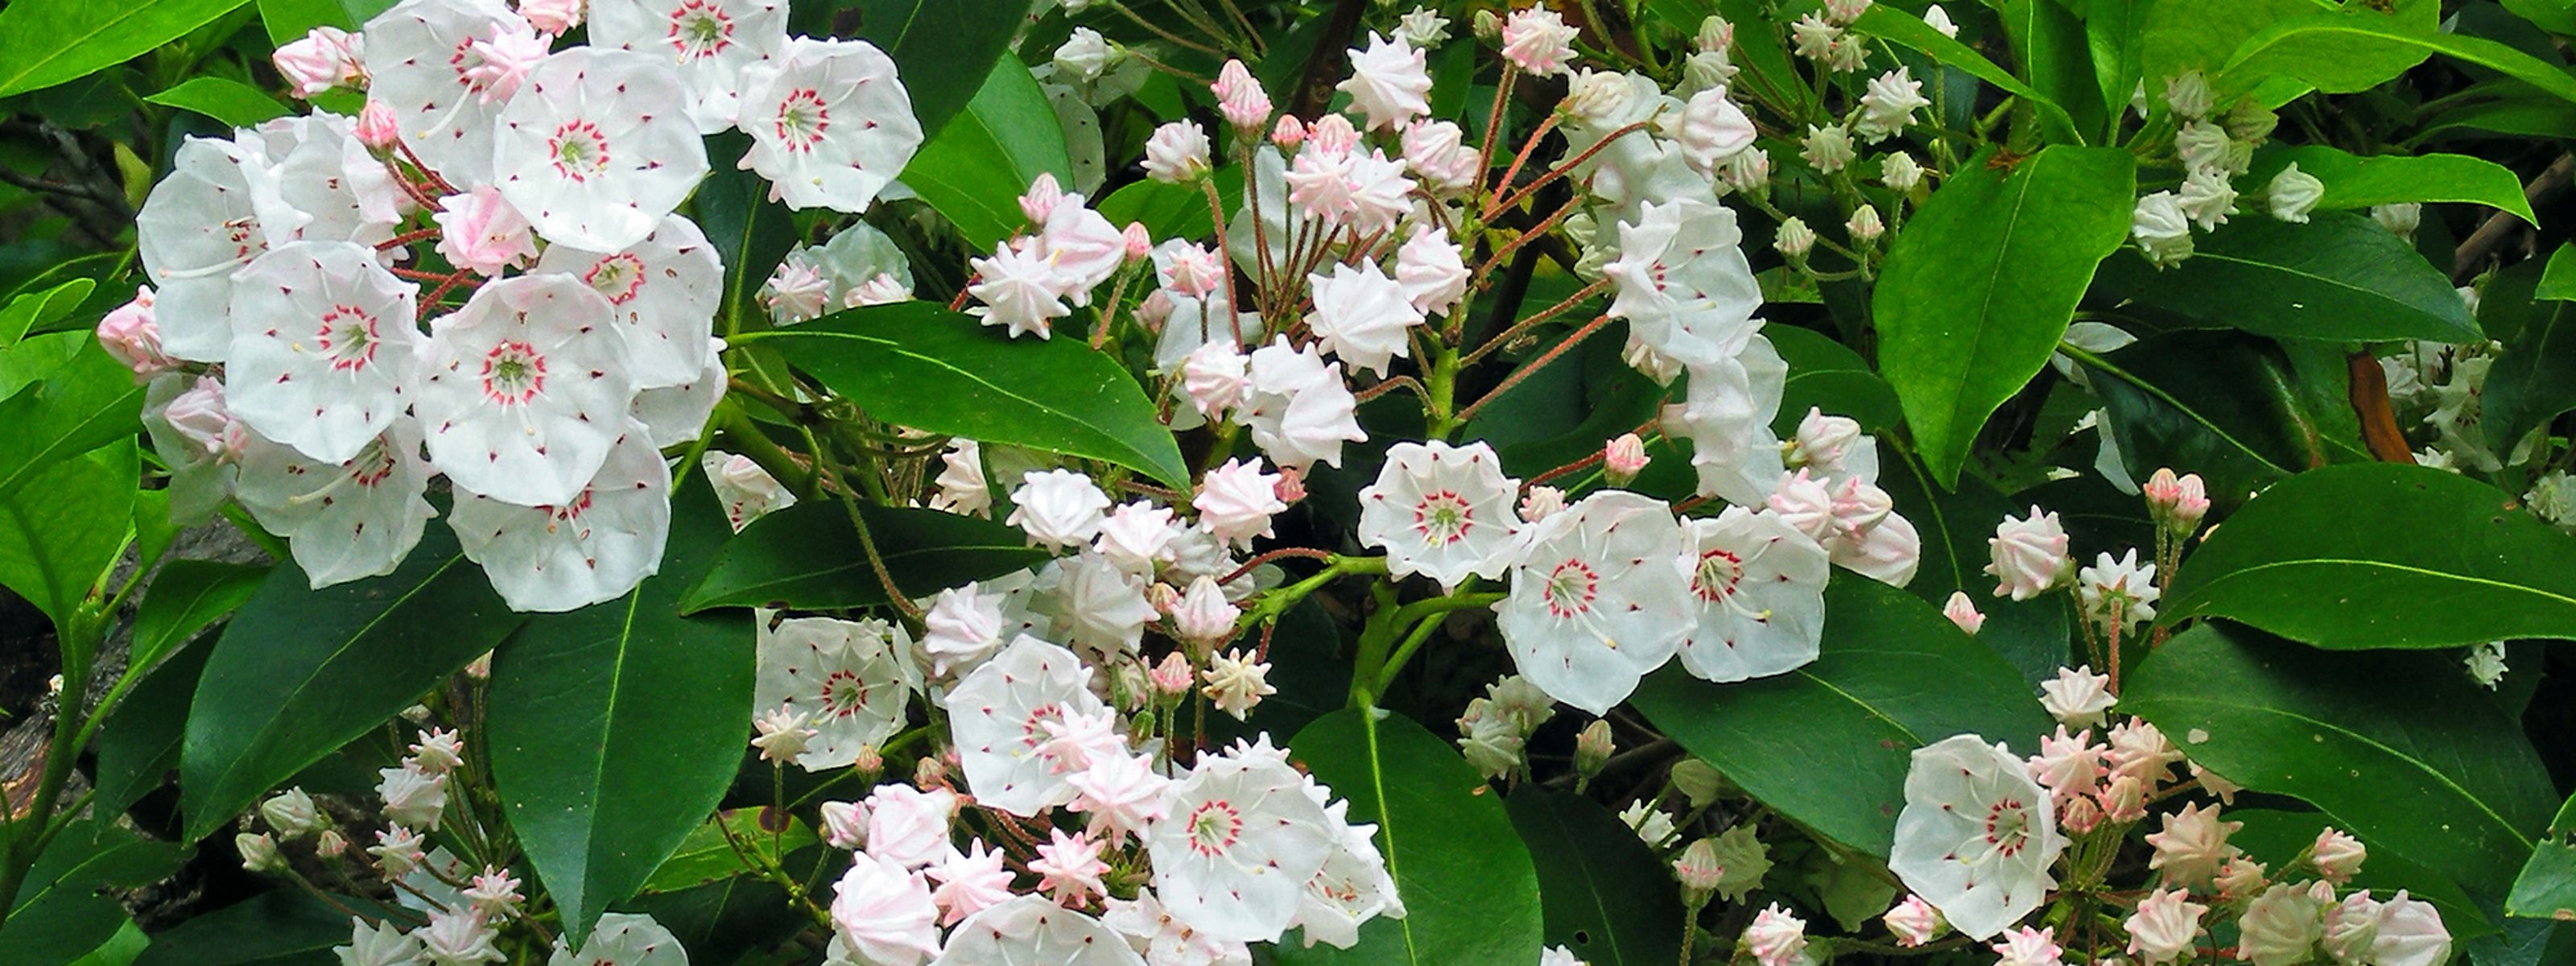 Several clusters of white flowers with pink accents grow on a green bush.